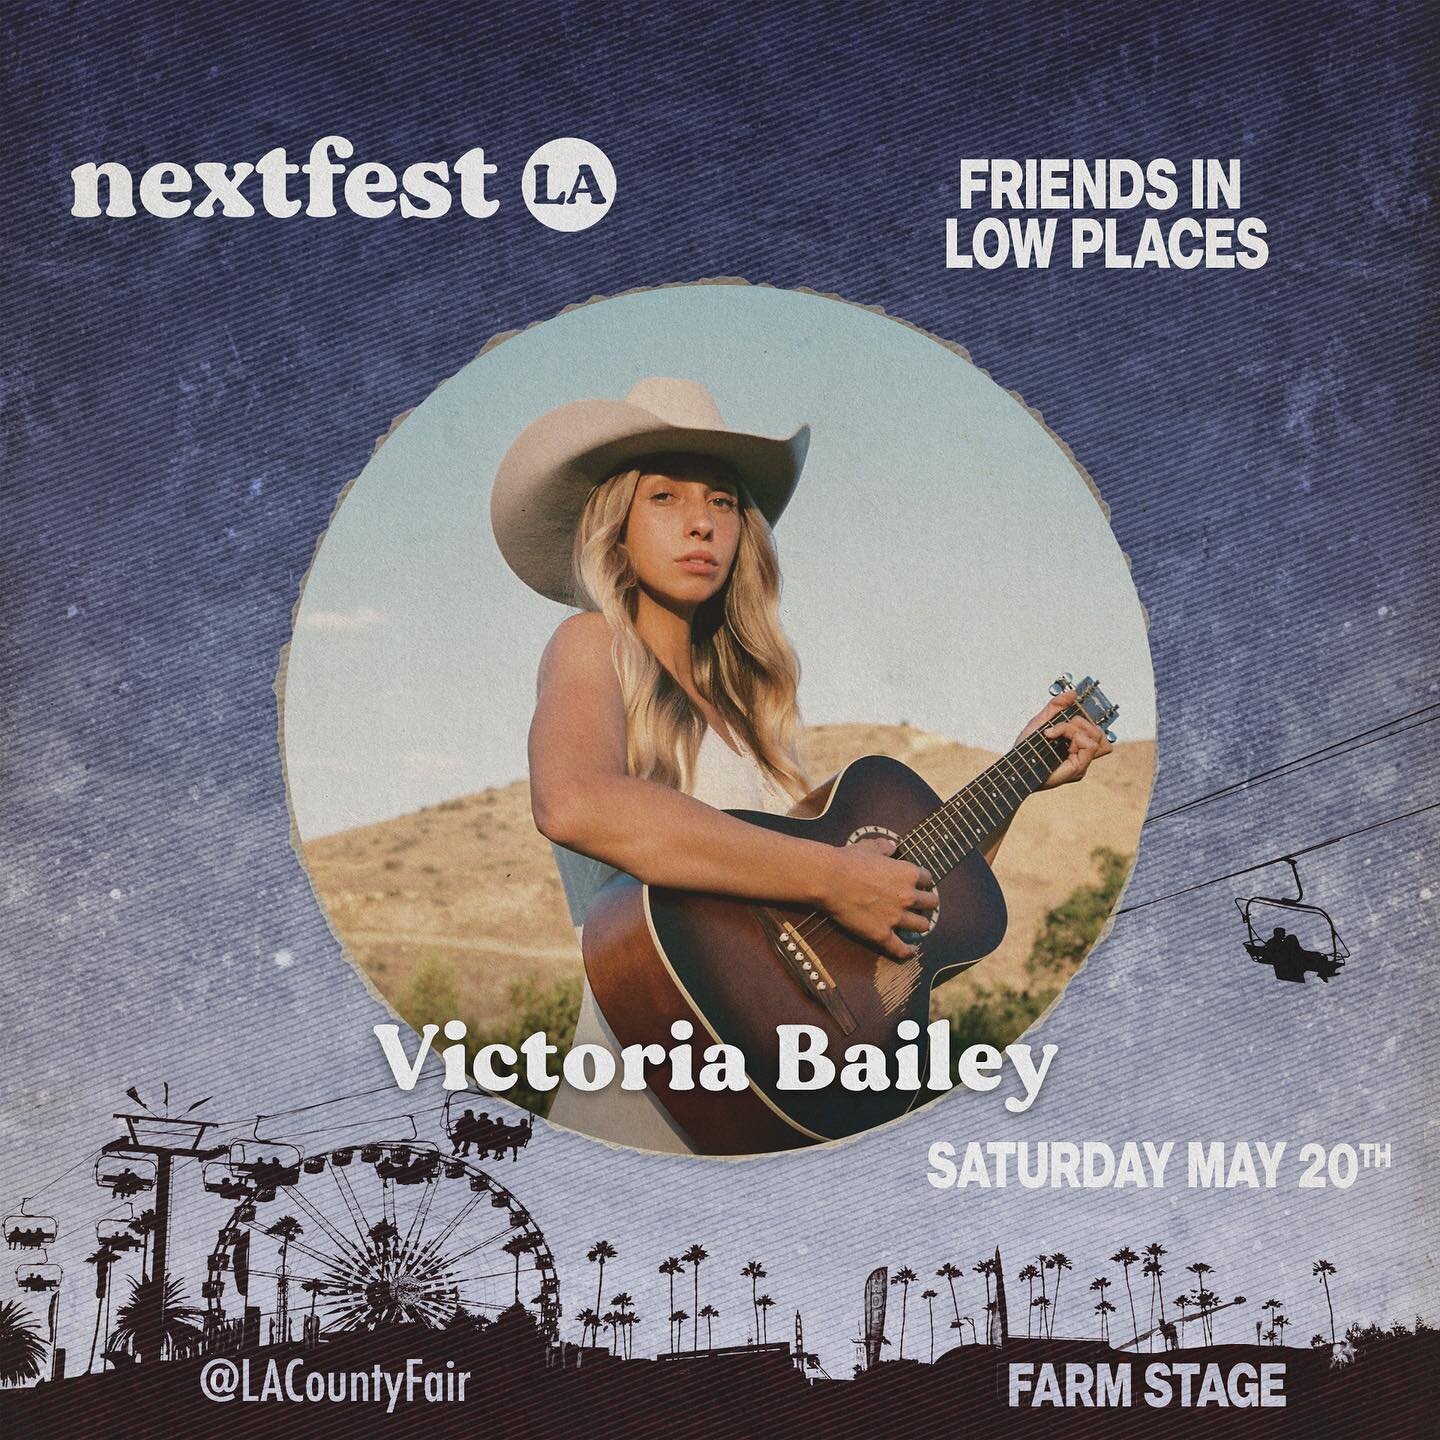 SATURDAY! 🌭🎢 I&rsquo;ll be hittin the @lacountyfair to play with my band and to eat corn dogs and ride the non scary rides 💛 @friendsinlowplacesla are taking over the Farm Stage &amp; they sure do have a good lineup ready for ya! 👢👢 @nextfestla